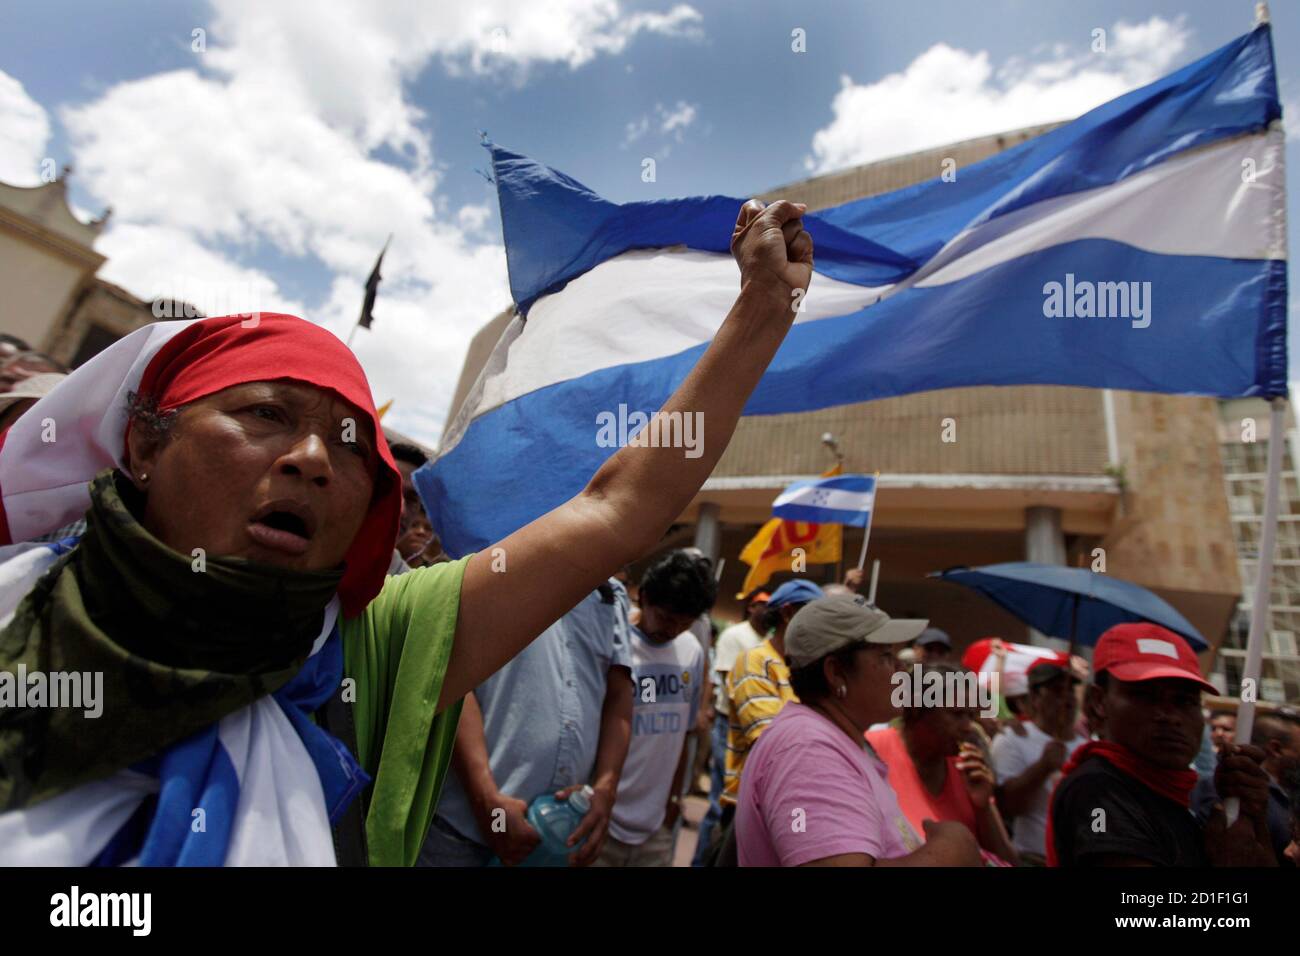 A supporter of Honduras' ousted President Manuel Zelaya waves during a protest outside the National Congress in Tegucigalpa July 20, 2009.  Honduras' de facto leader came under increased pressure on Monday to hand power back to the ousted president with Europe halting economic aid and top Latin American officials warning of bloodshed if he does not back down. REUTERS/Edgard Garrido (HONDURAS POLITICS CONFLICT IMAGES OF THE DAY) Stock Photo